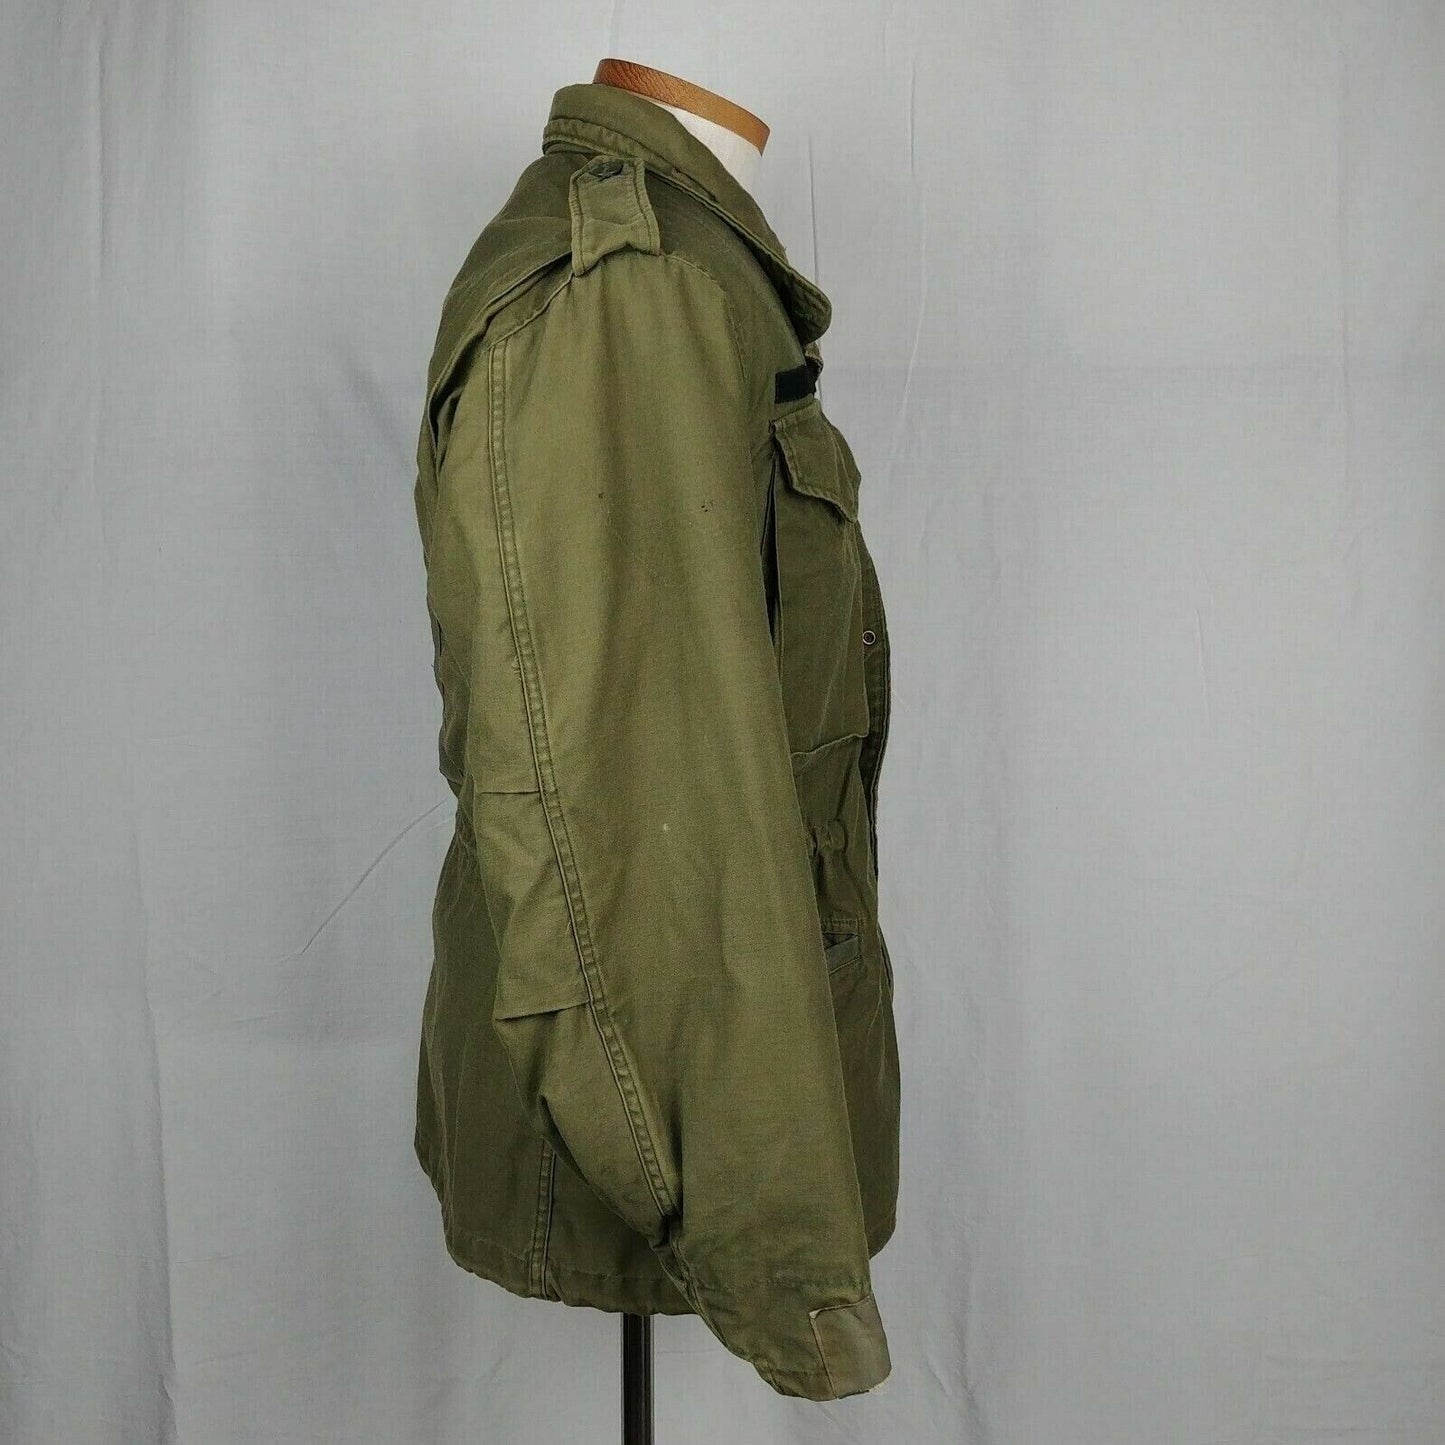 US Military Olive Drab Green Cold Weather Field Coat Jacket Mens Size Small